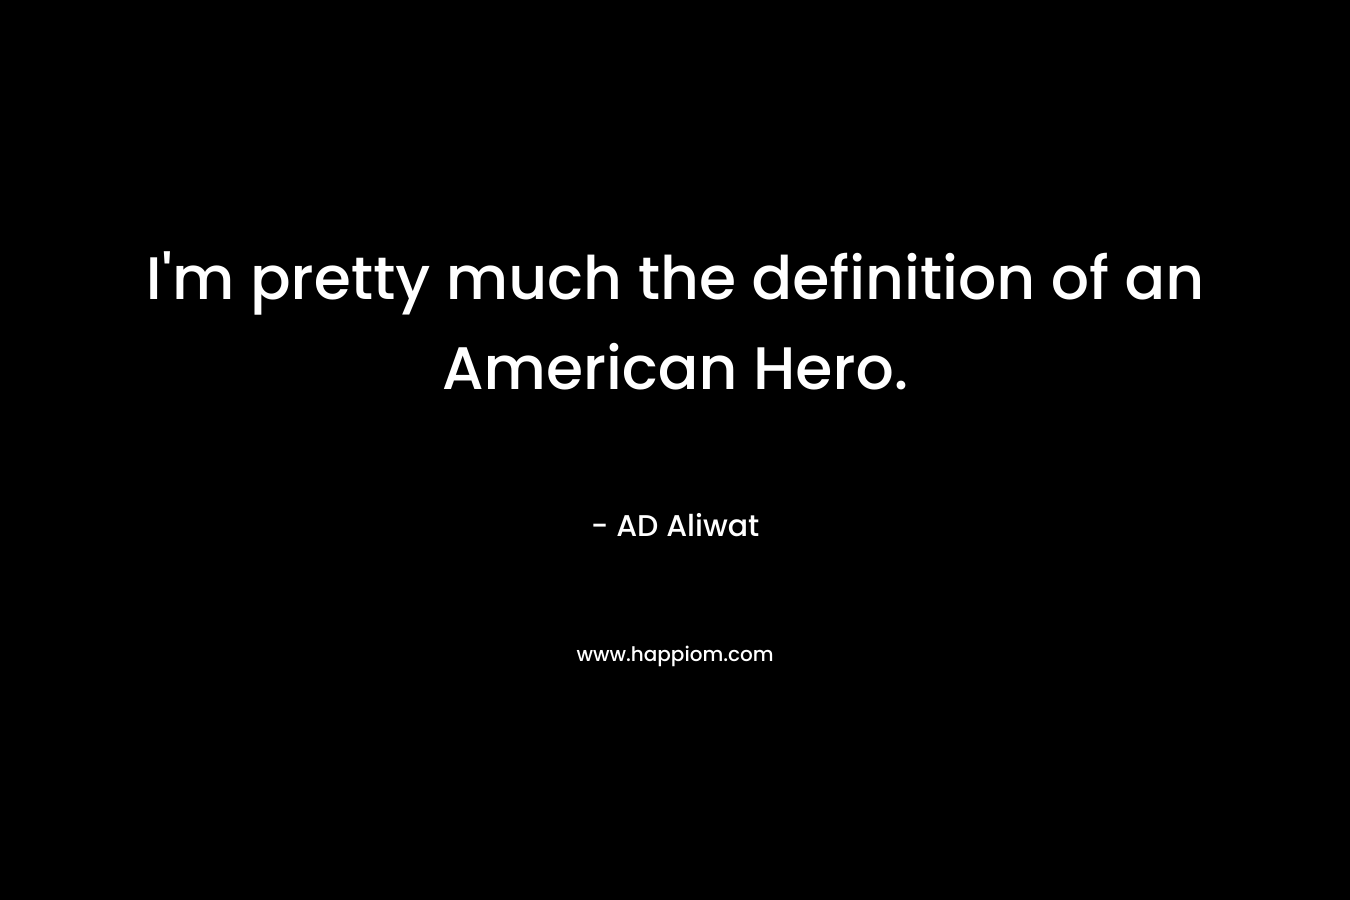 I'm pretty much the definition of an American Hero.